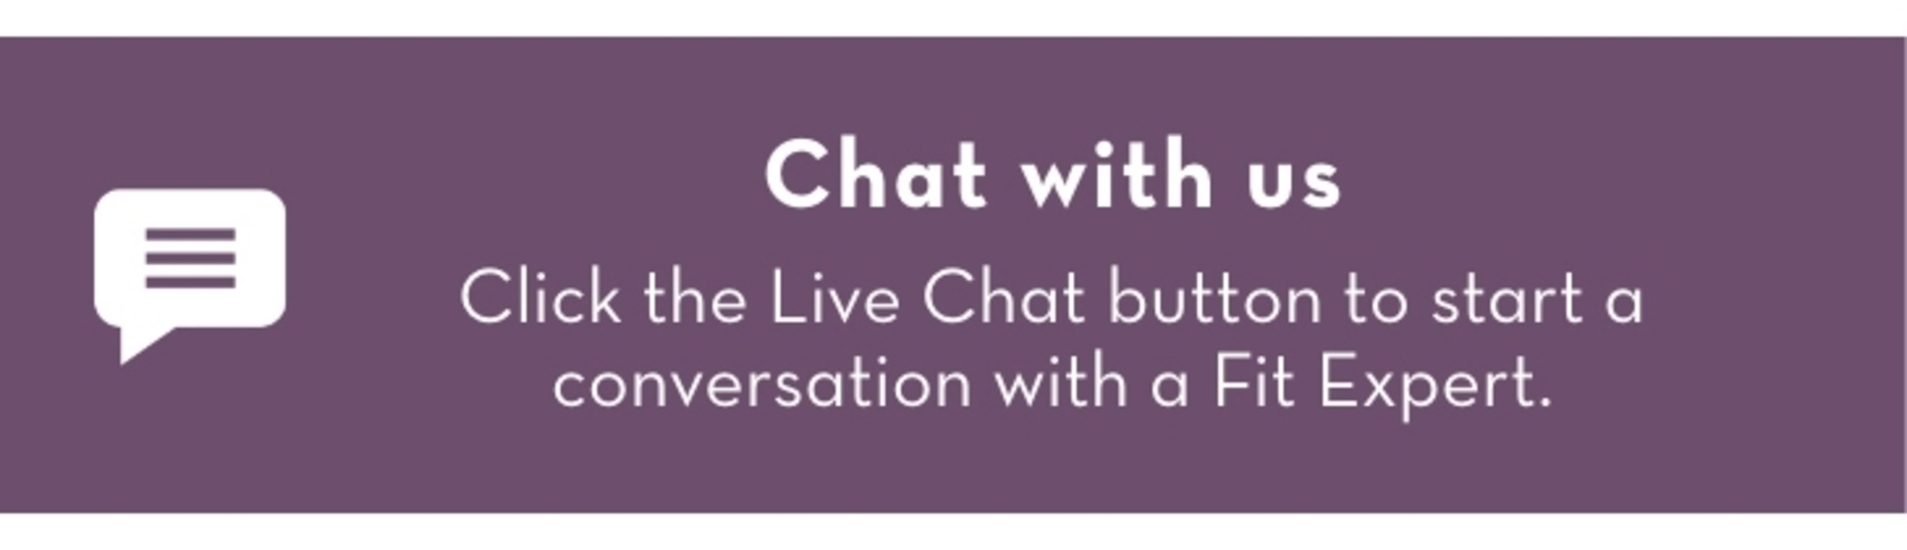 Chat with Us: Click the Live Chat button to start a conversation with a Fit Expert